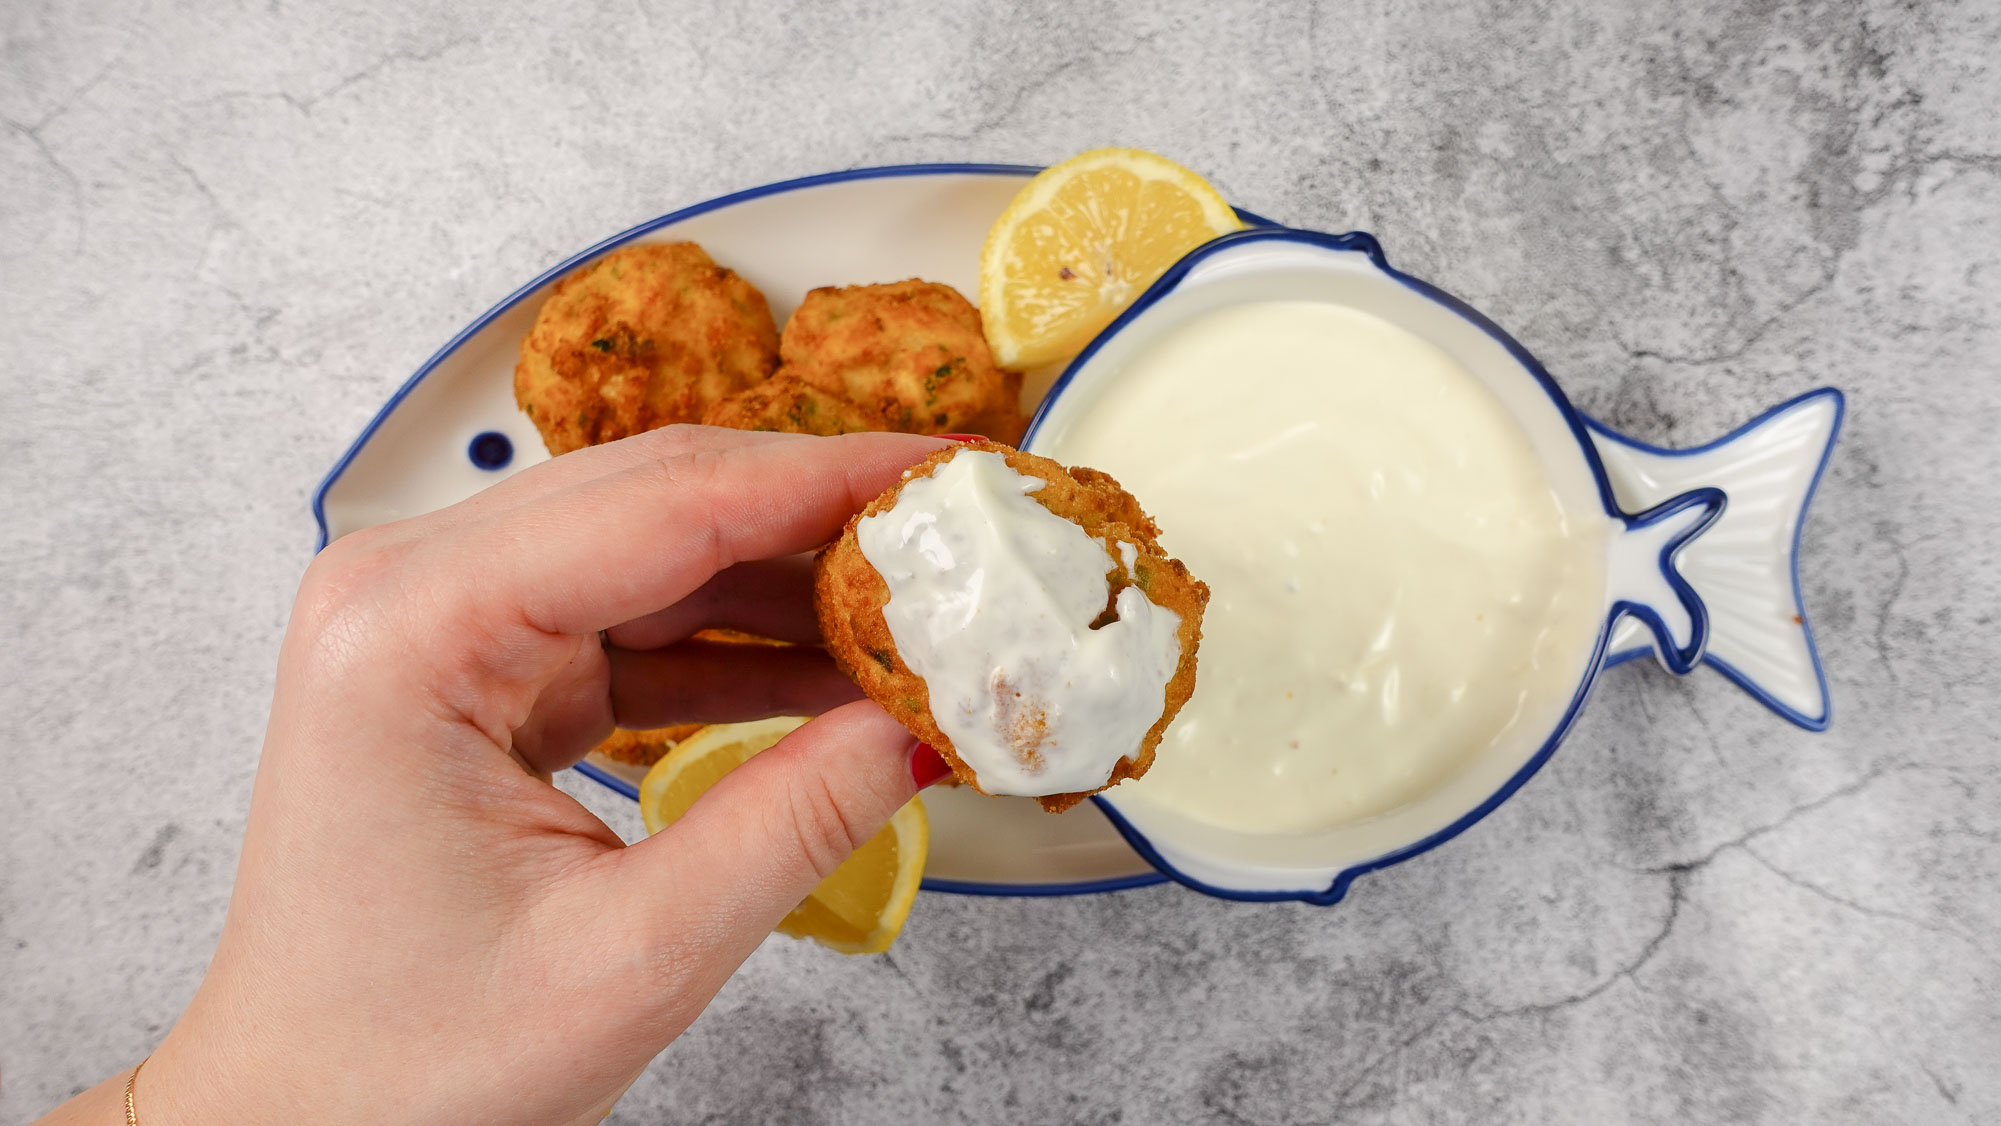 A croquette dipped in a white sause.